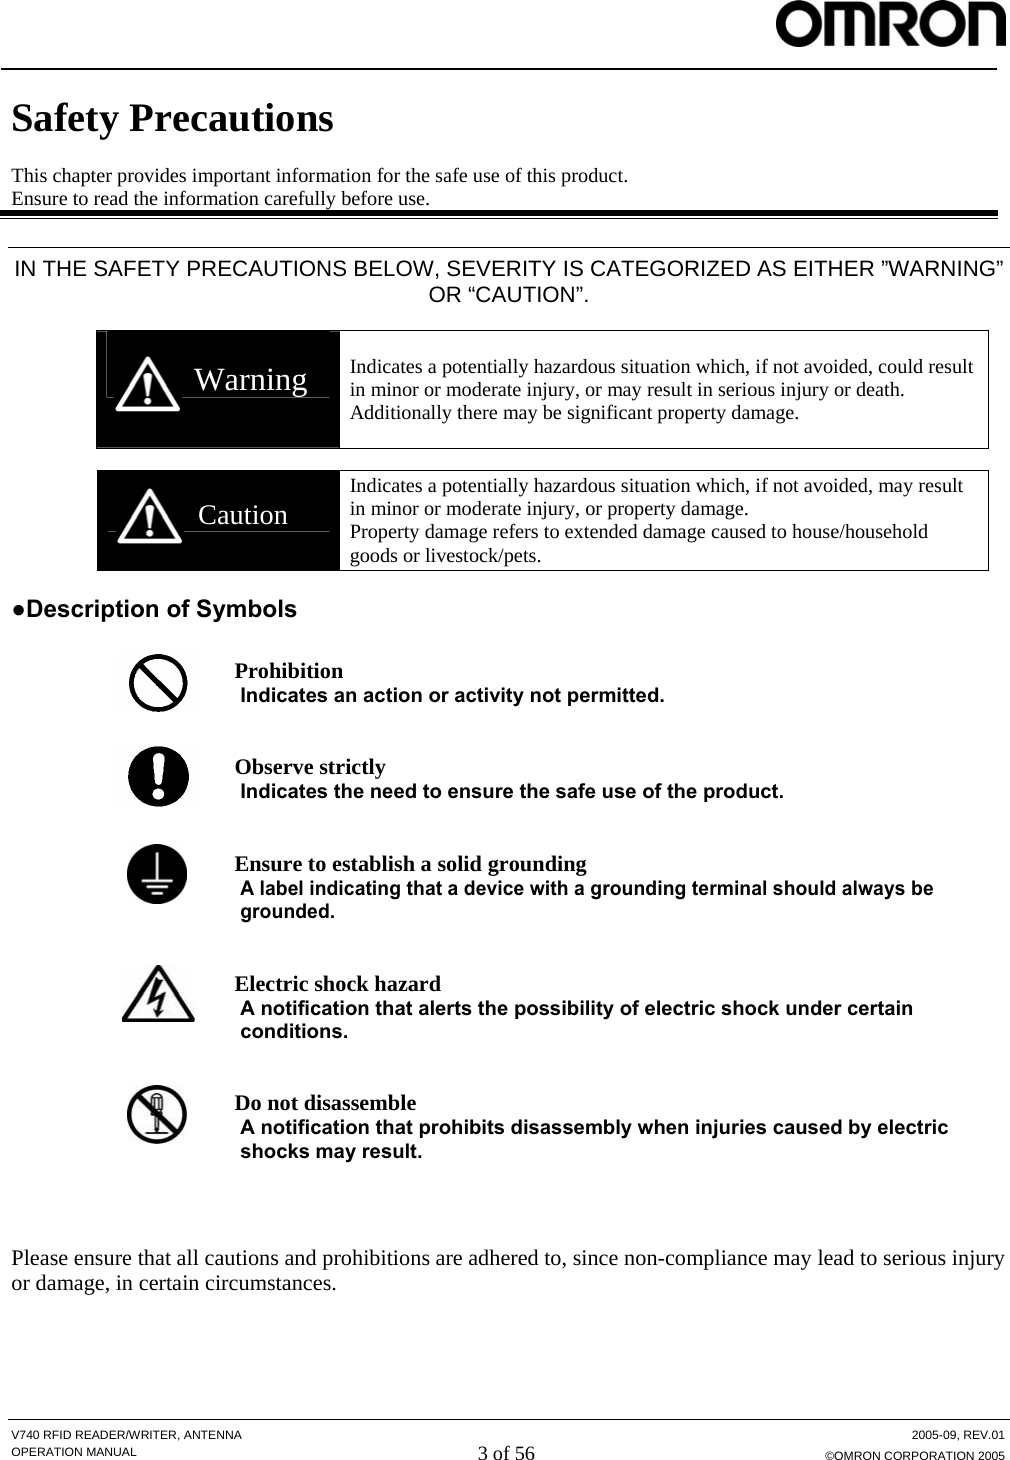  V740 RFID READER/WRITER, ANTENNA  2005-09, REV.01 OPERATION MANUAL 3 of 56 ©OMRON CORPORATION 2005  Safety Precautions  This chapter provides important information for the safe use of this product. Ensure to read the information carefully before use.  IN THE SAFETY PRECAUTIONS BELOW, SEVERITY IS CATEGORIZED AS EITHER ”WARNING” OR “CAUTION”.   Warning  Indicates a potentially hazardous situation which, if not avoided, could result in minor or moderate injury, or may result in serious injury or death. Additionally there may be significant property damage.    Caution Indicates a potentially hazardous situation which, if not avoided, may result in minor or moderate injury, or property damage. Property damage refers to extended damage caused to house/household goods or livestock/pets.  ●Description of Symbols   Prohibition Indicates an action or activity not permitted.   Observe strictly Indicates the need to ensure the safe use of the product.   Ensure to establish a solid grounding A label indicating that a device with a grounding terminal should always be grounded.   Electric shock hazard A notification that alerts the possibility of electric shock under certain conditions.   Do not disassemble A notification that prohibits disassembly when injuries caused by electric shocks may result.    Please ensure that all cautions and prohibitions are adhered to, since non-compliance may lead to serious injury or damage, in certain circumstances.  